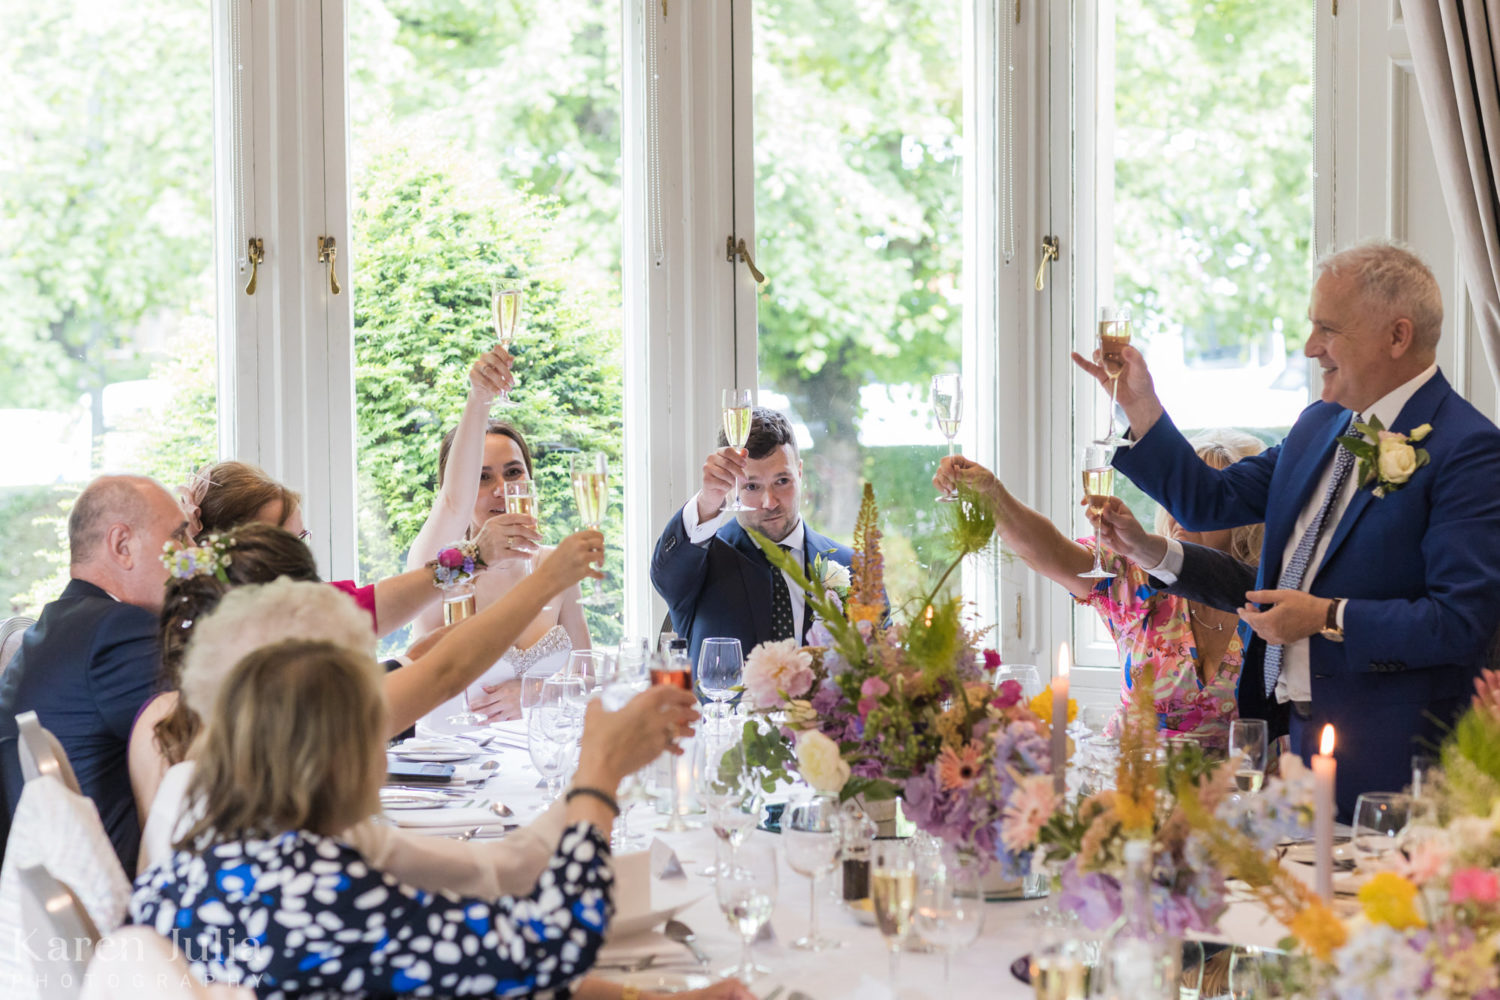 wedding guests raise their glasses in a toast to the couple